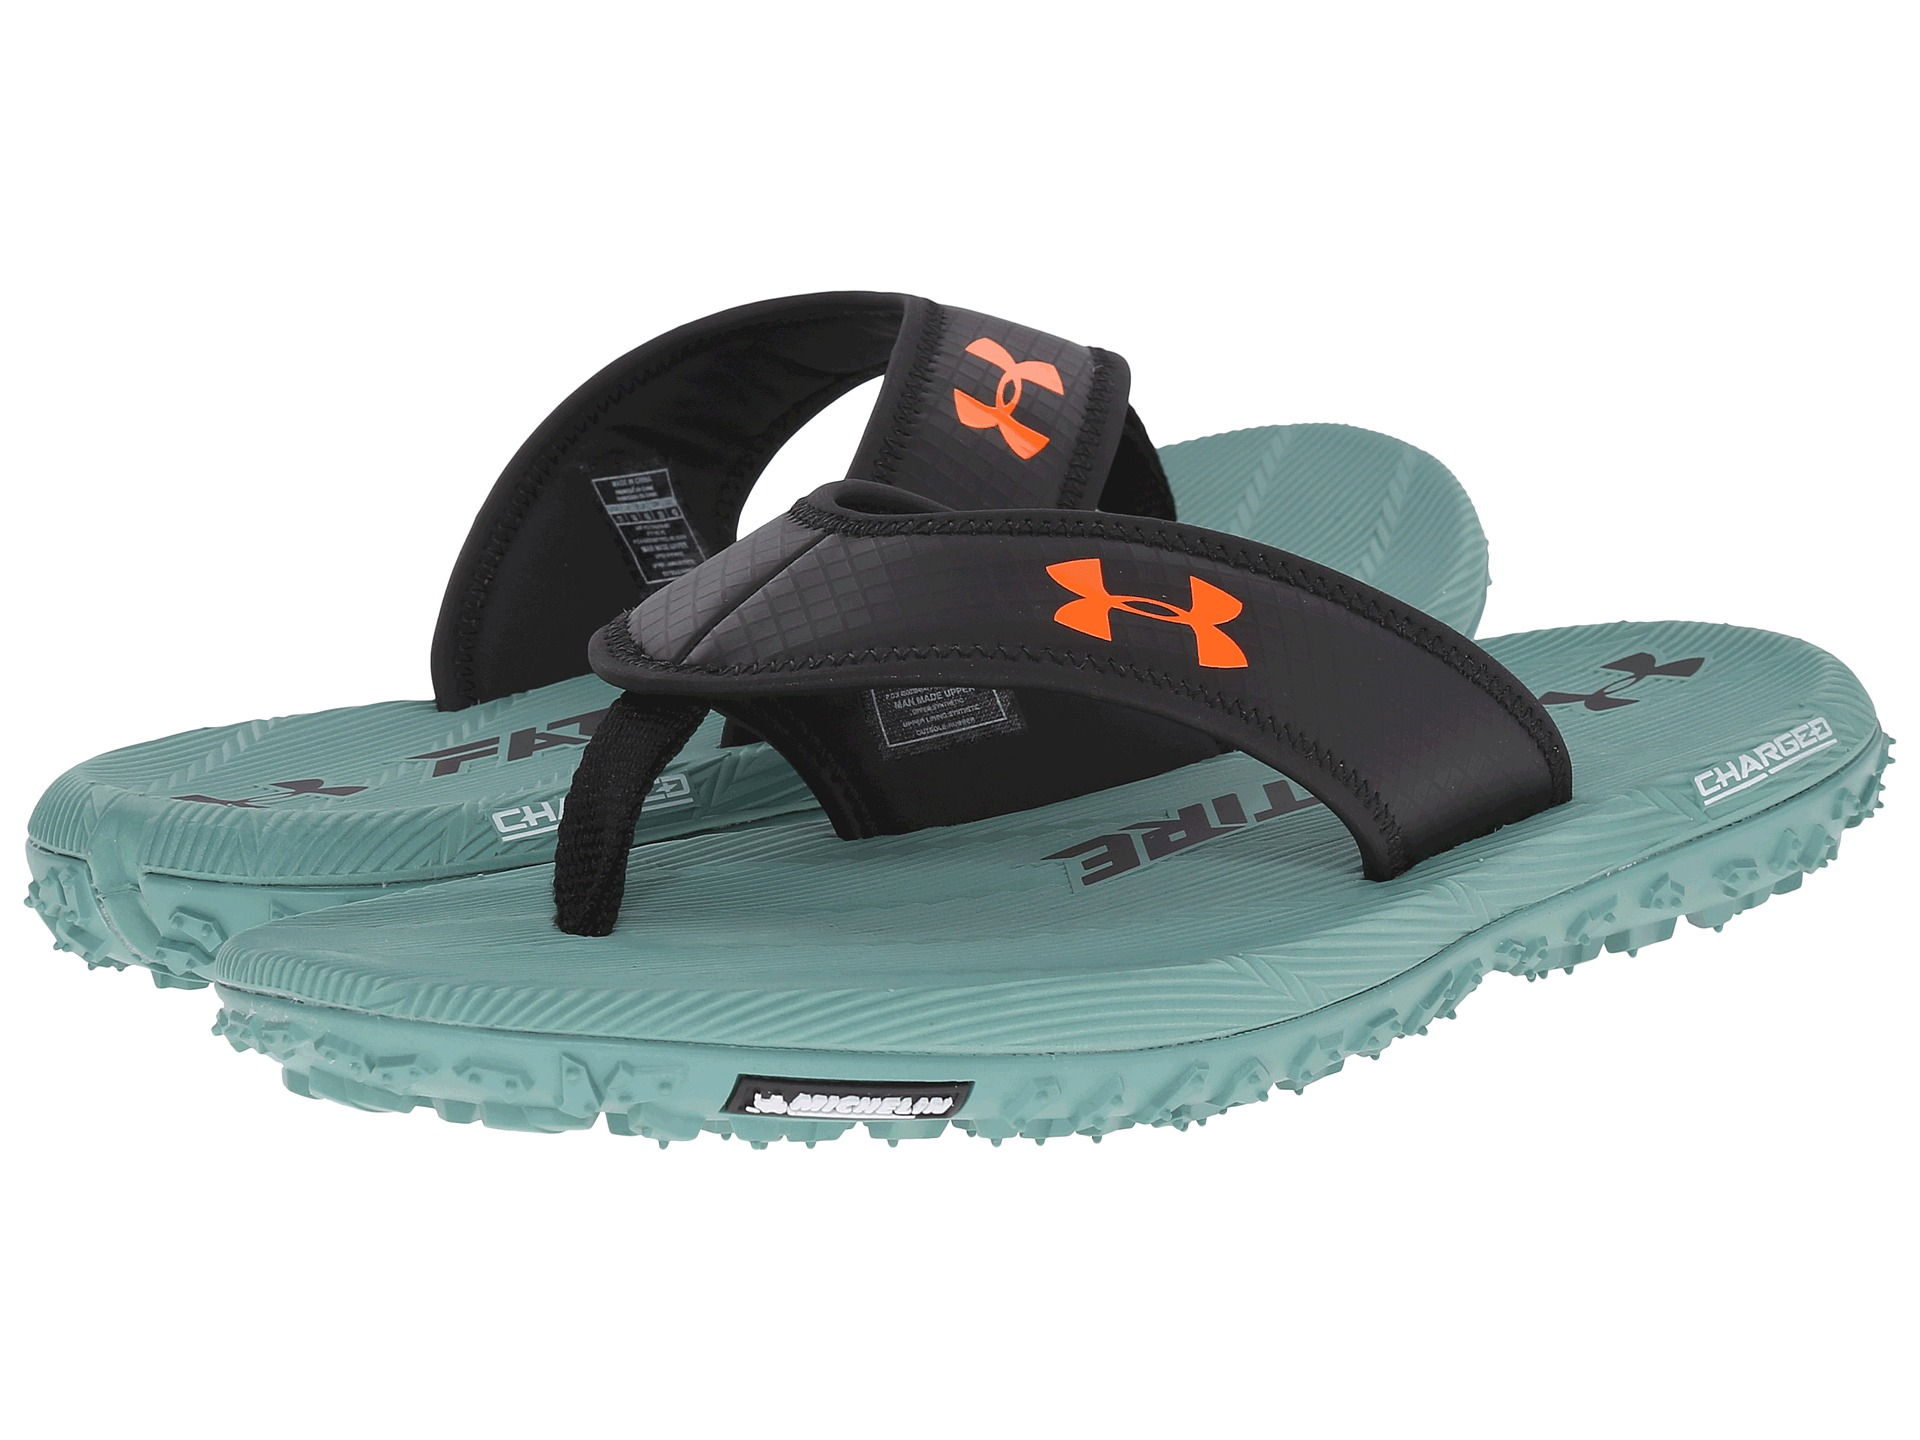 under armour fat tire slippers